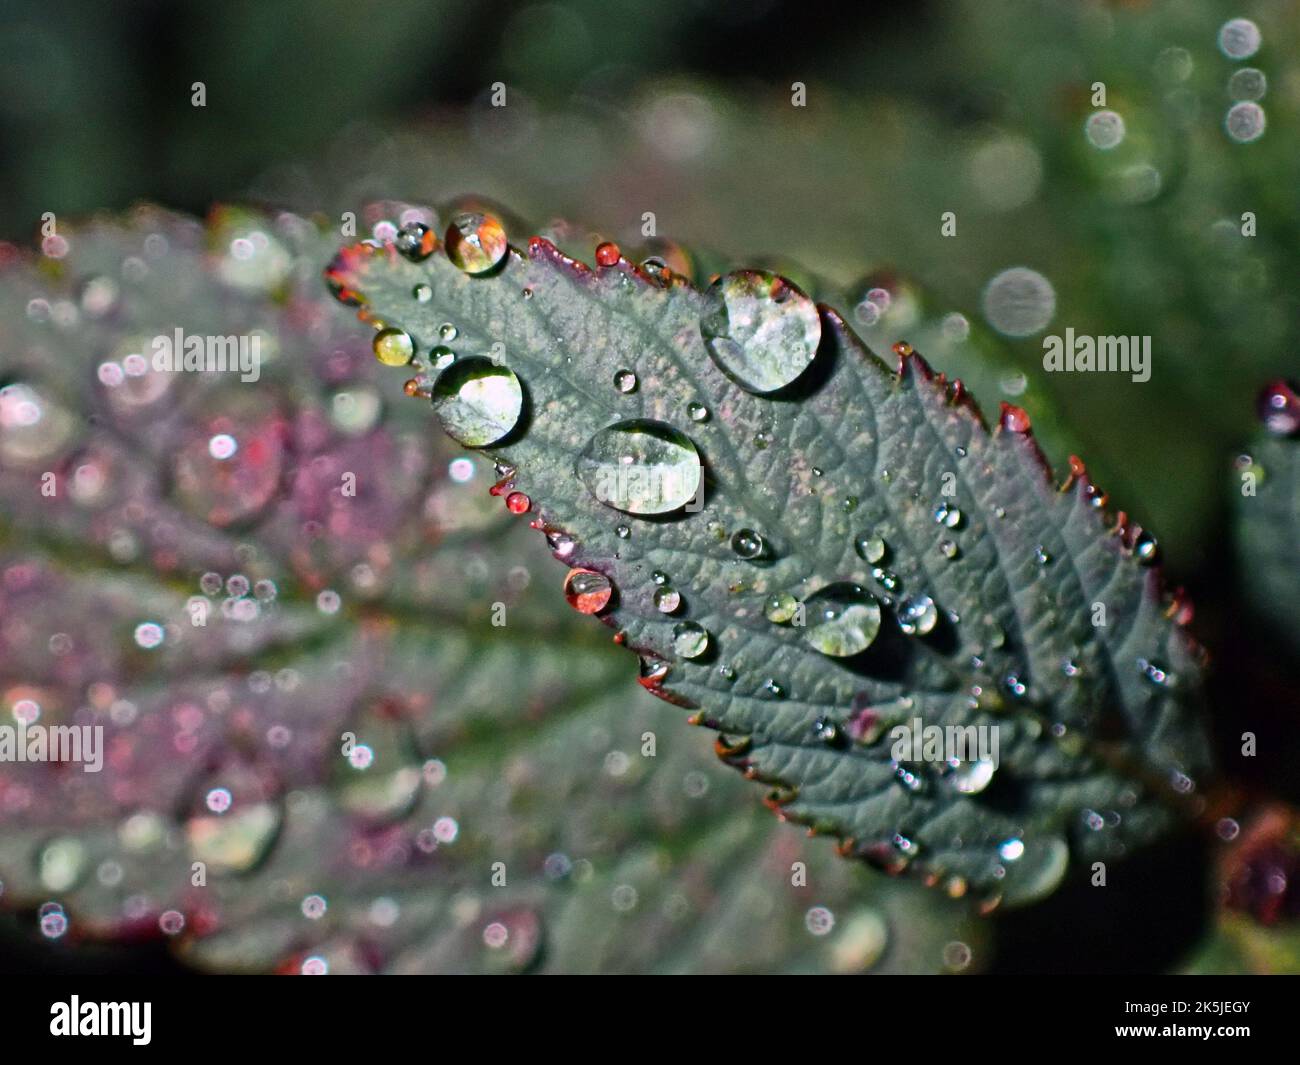 Large water drops in autumn on Kale leaves Stock Photo